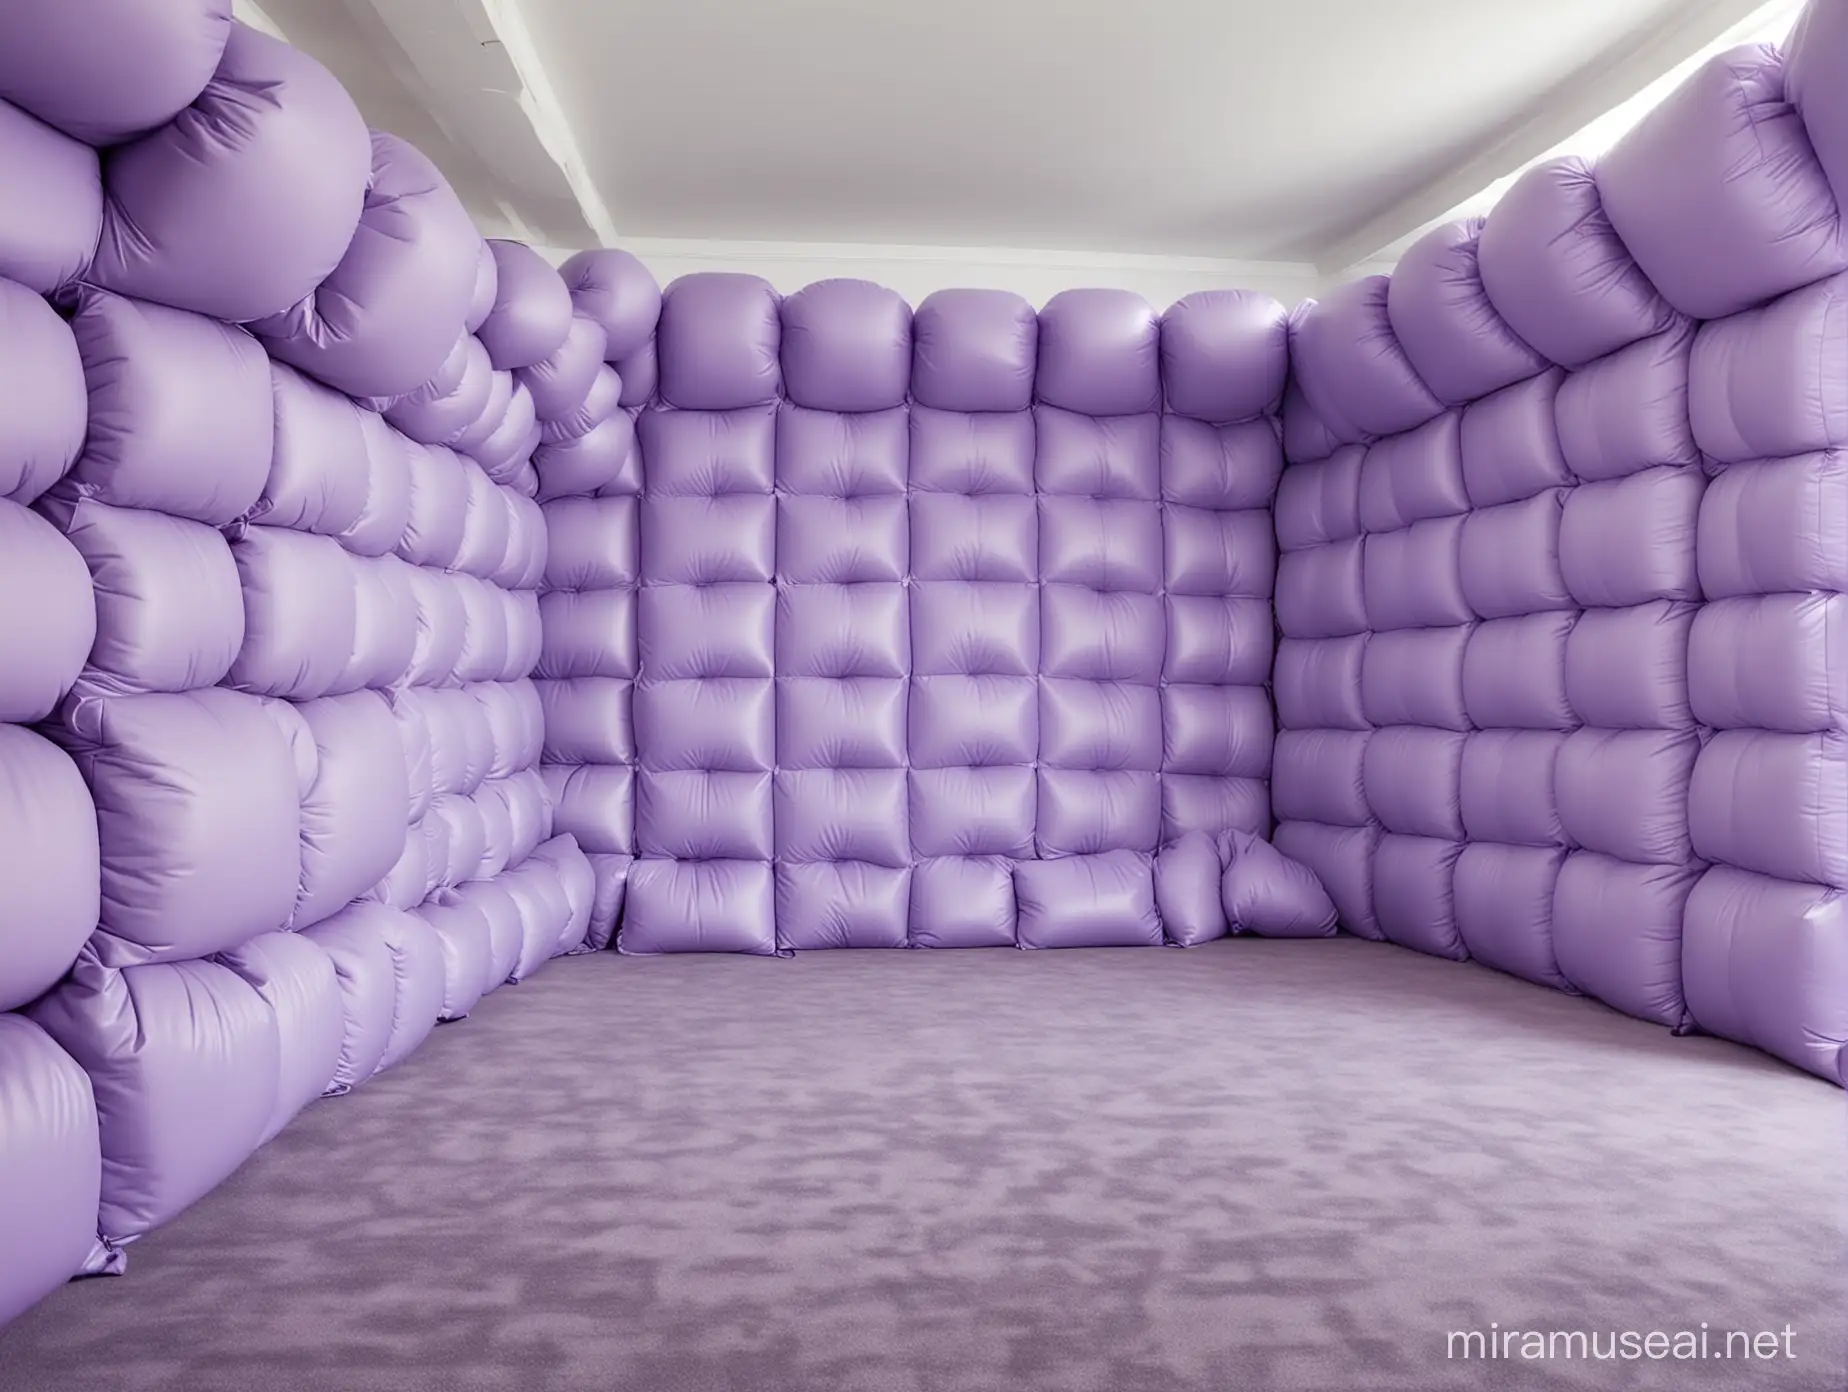 a pop-up space that is 5metre wide x 5 metre depth x 2.5 metre height (3 sided puffy walls made up of back wall, left and right- like puffer jacket squareish puffs, base colour baby blue with sporadic large purple blobs printed on it), flooring is in the same shade of blue as the walls but just a simple carpet. keep the room empty.